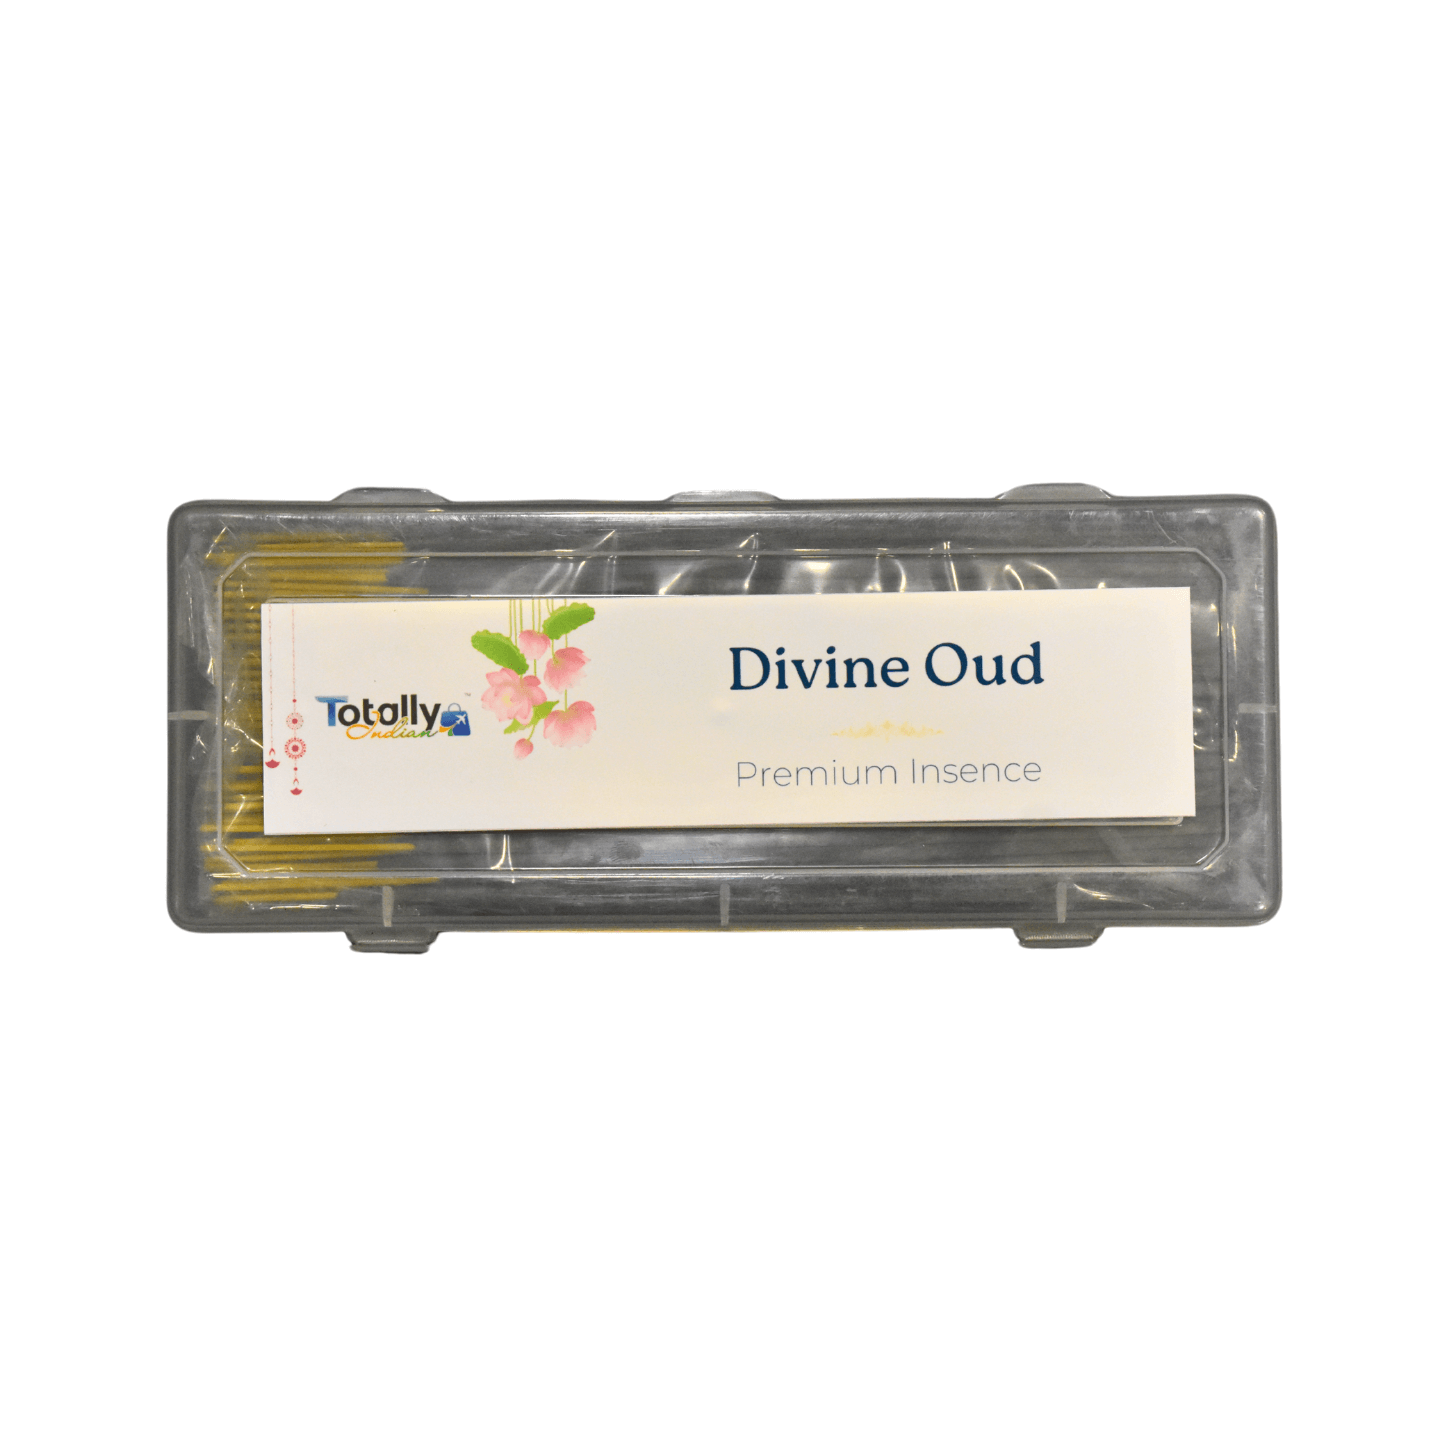 Smoke-less Premium Incense | Divine Oud - Totally Indian